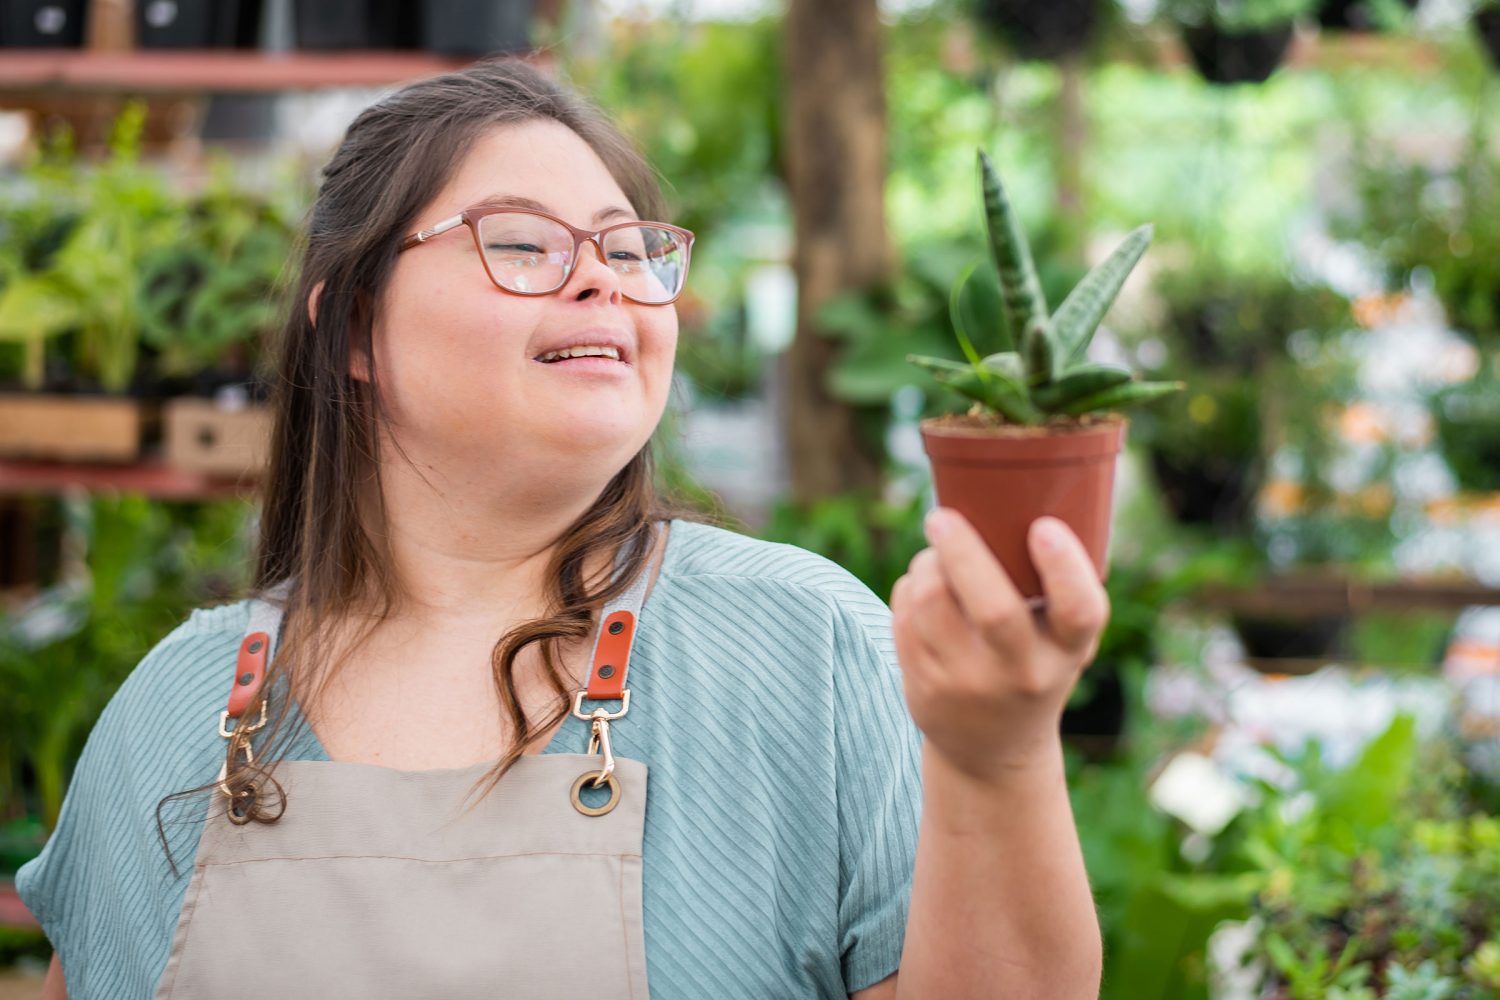 Girl with Down syndrome holds plant in garden center